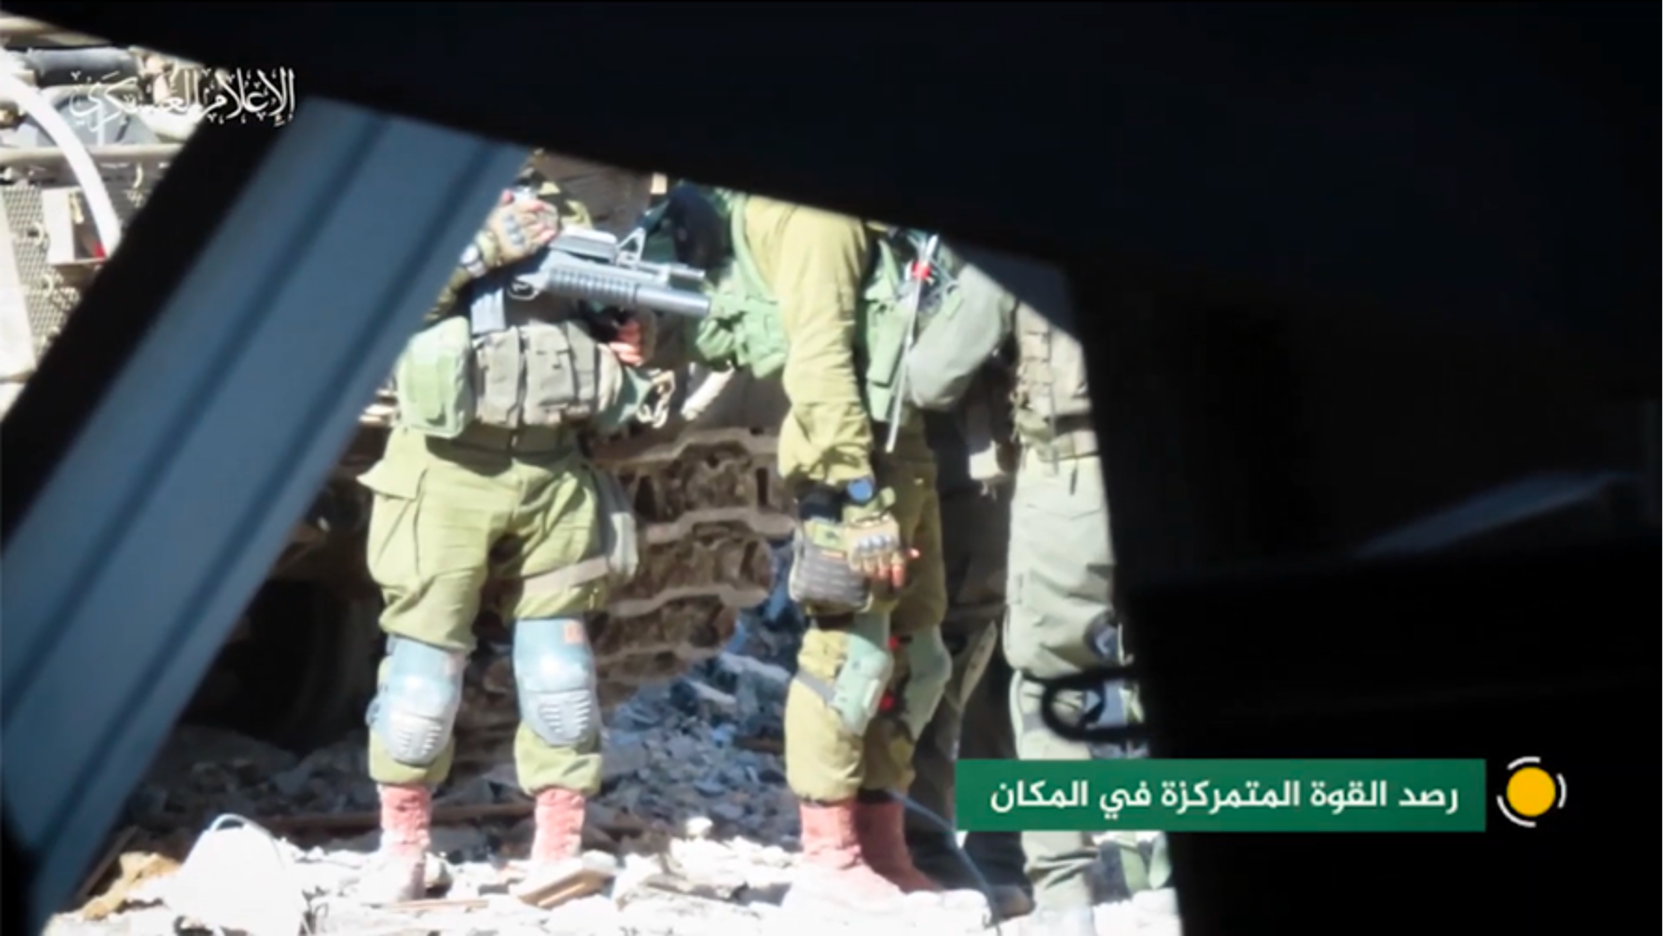 Video still stating EQB is “monitoring [IDF] forces," narrating their action with captions. (Source: Telegram)